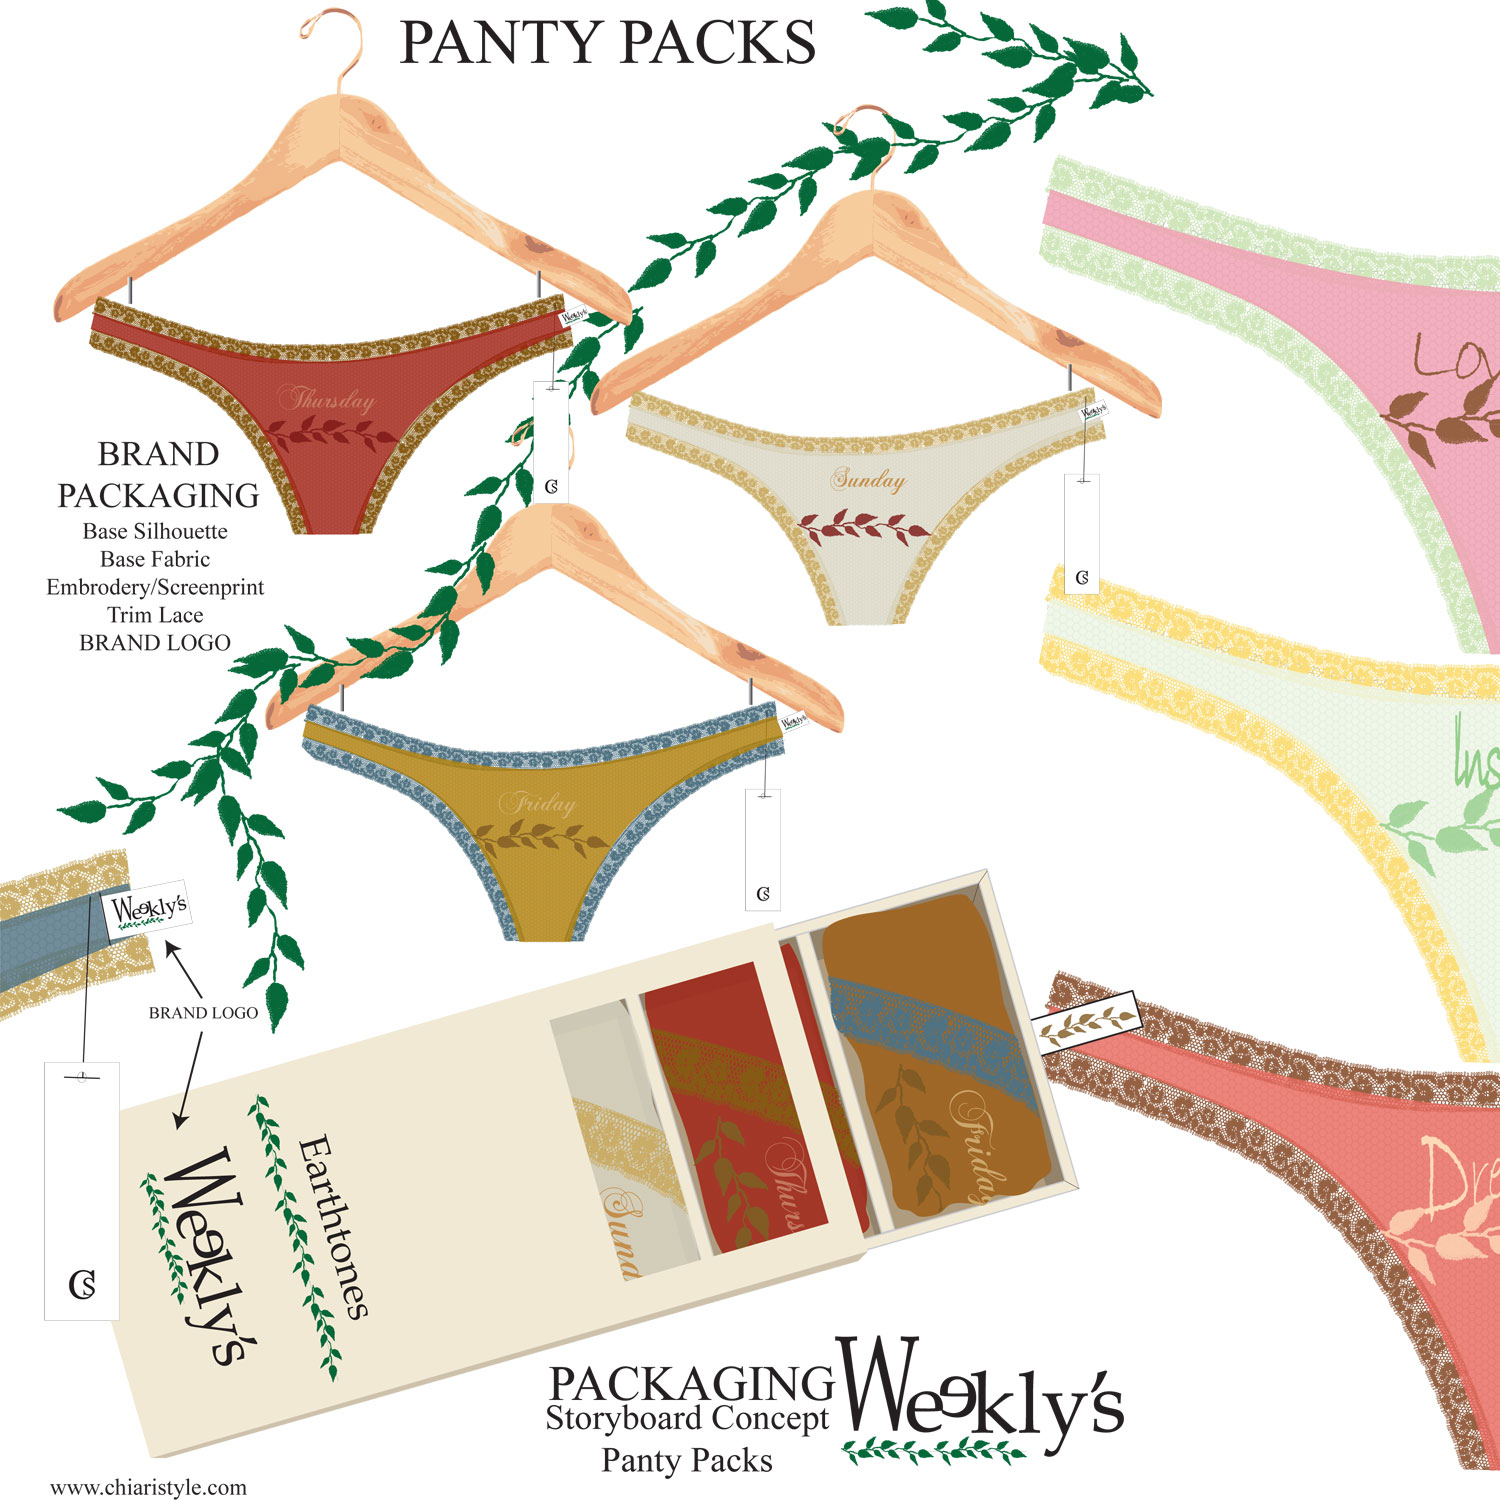 Looking for panty packaging concepts for 2020/21 lingerie design? —  CHIARIstyle